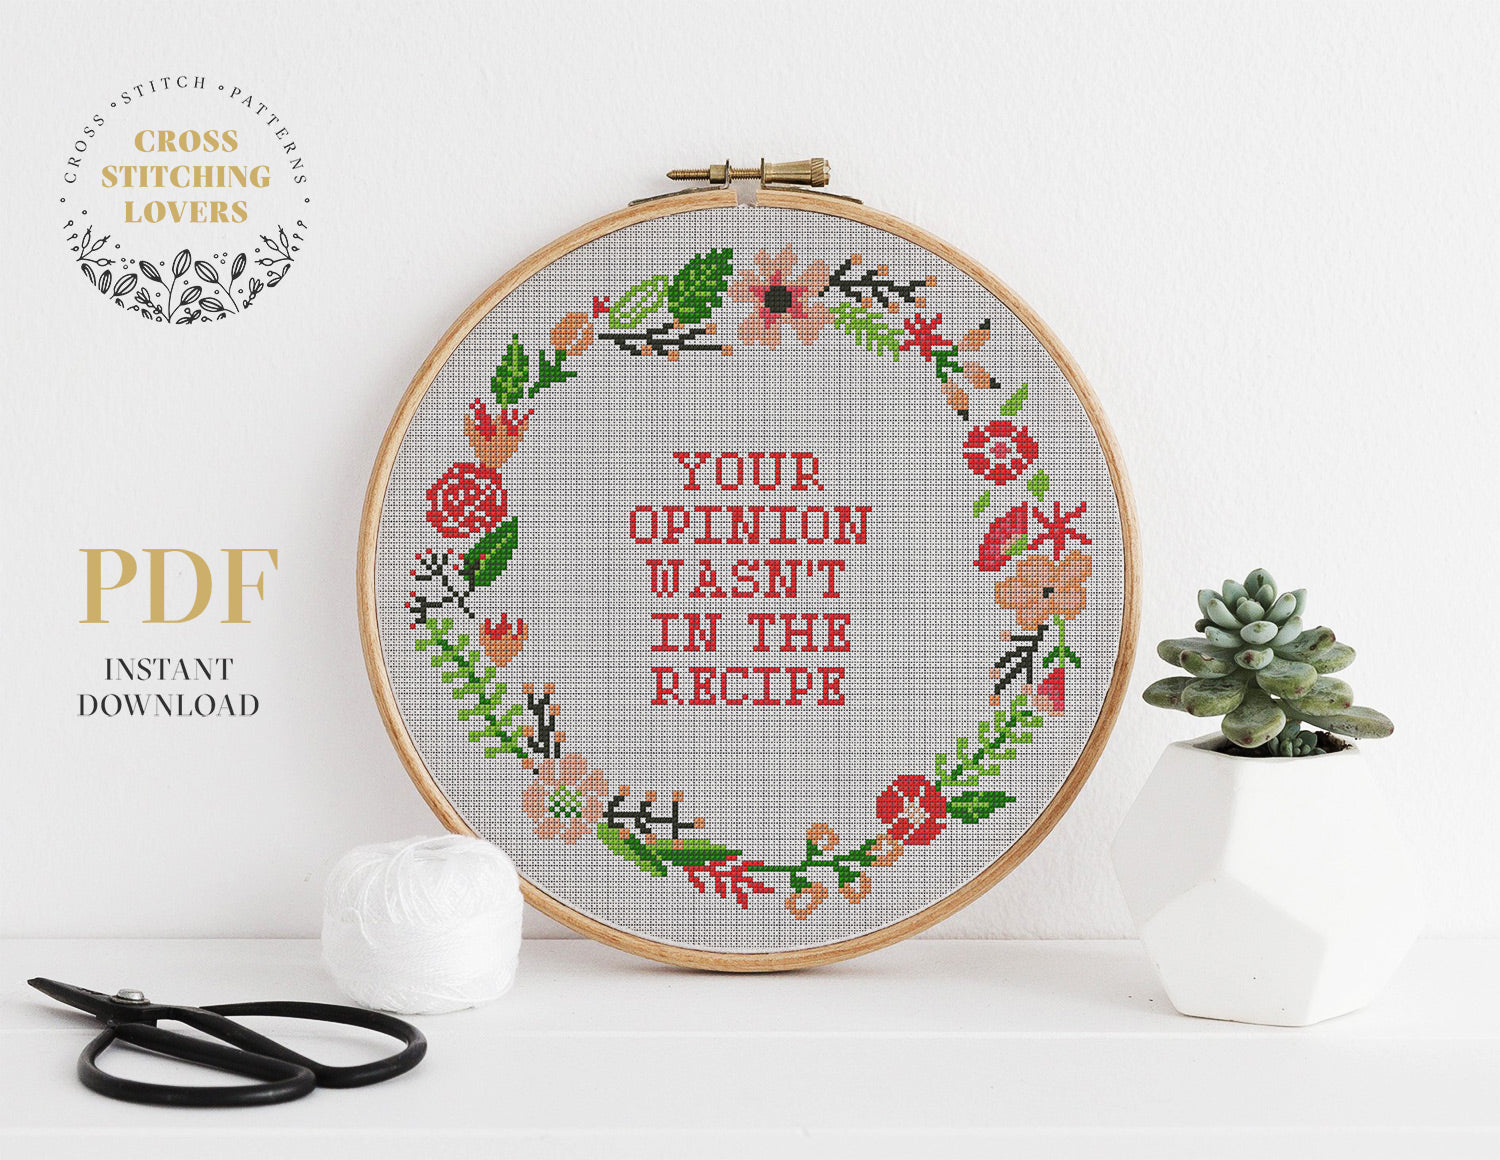 YOUR OPINION WASN'T IN THE RECIPE - Cross stitch pattern